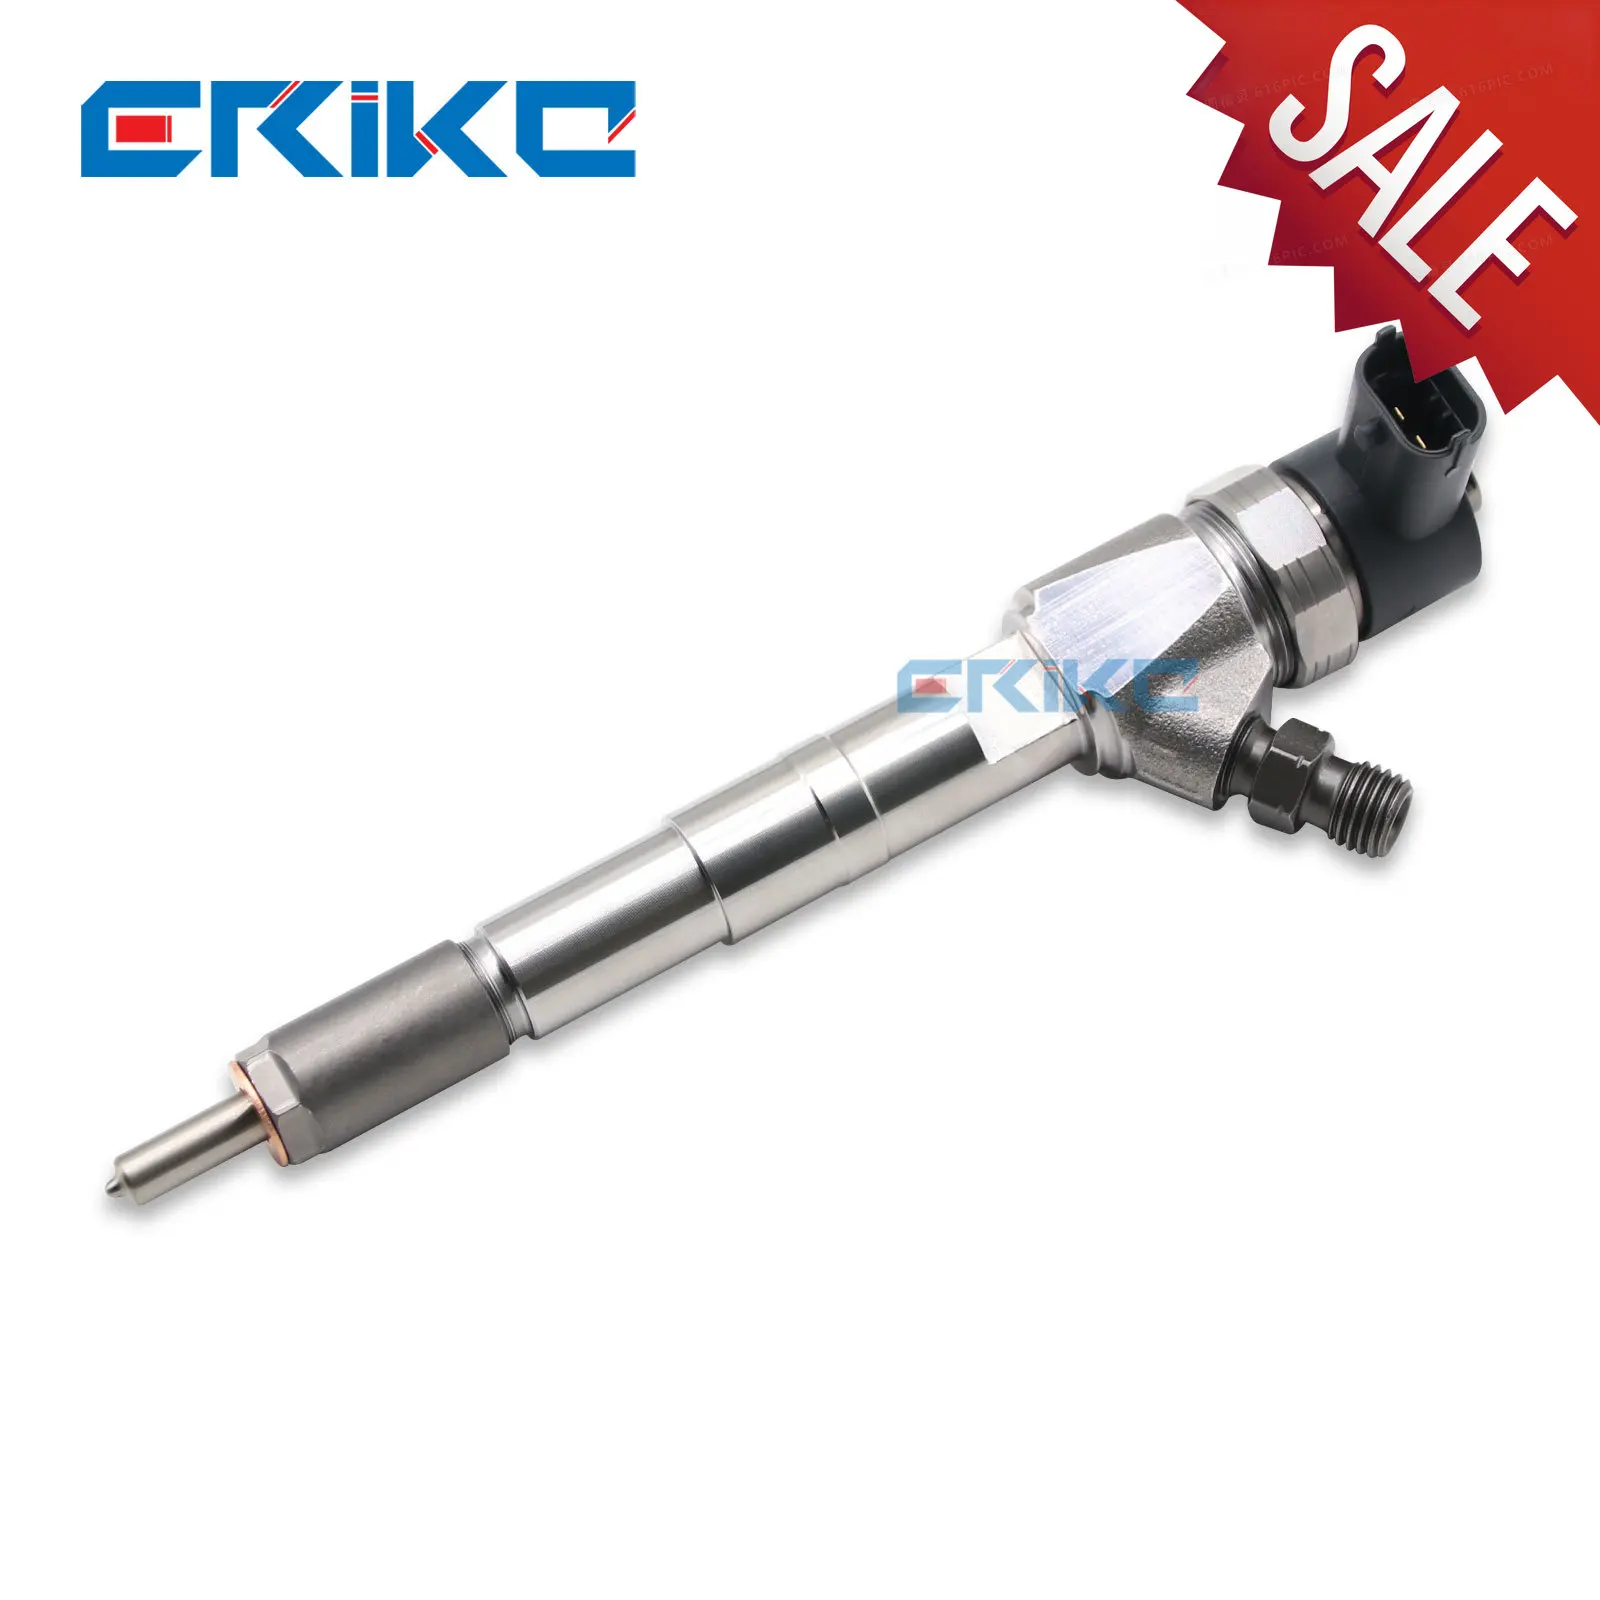 

0445110222 3800-2A100 338002A110 Injector 0 445 110 222 Oil Common Rail Injector 0445 110 222 Auto Injector for HYUNDAI & KIA